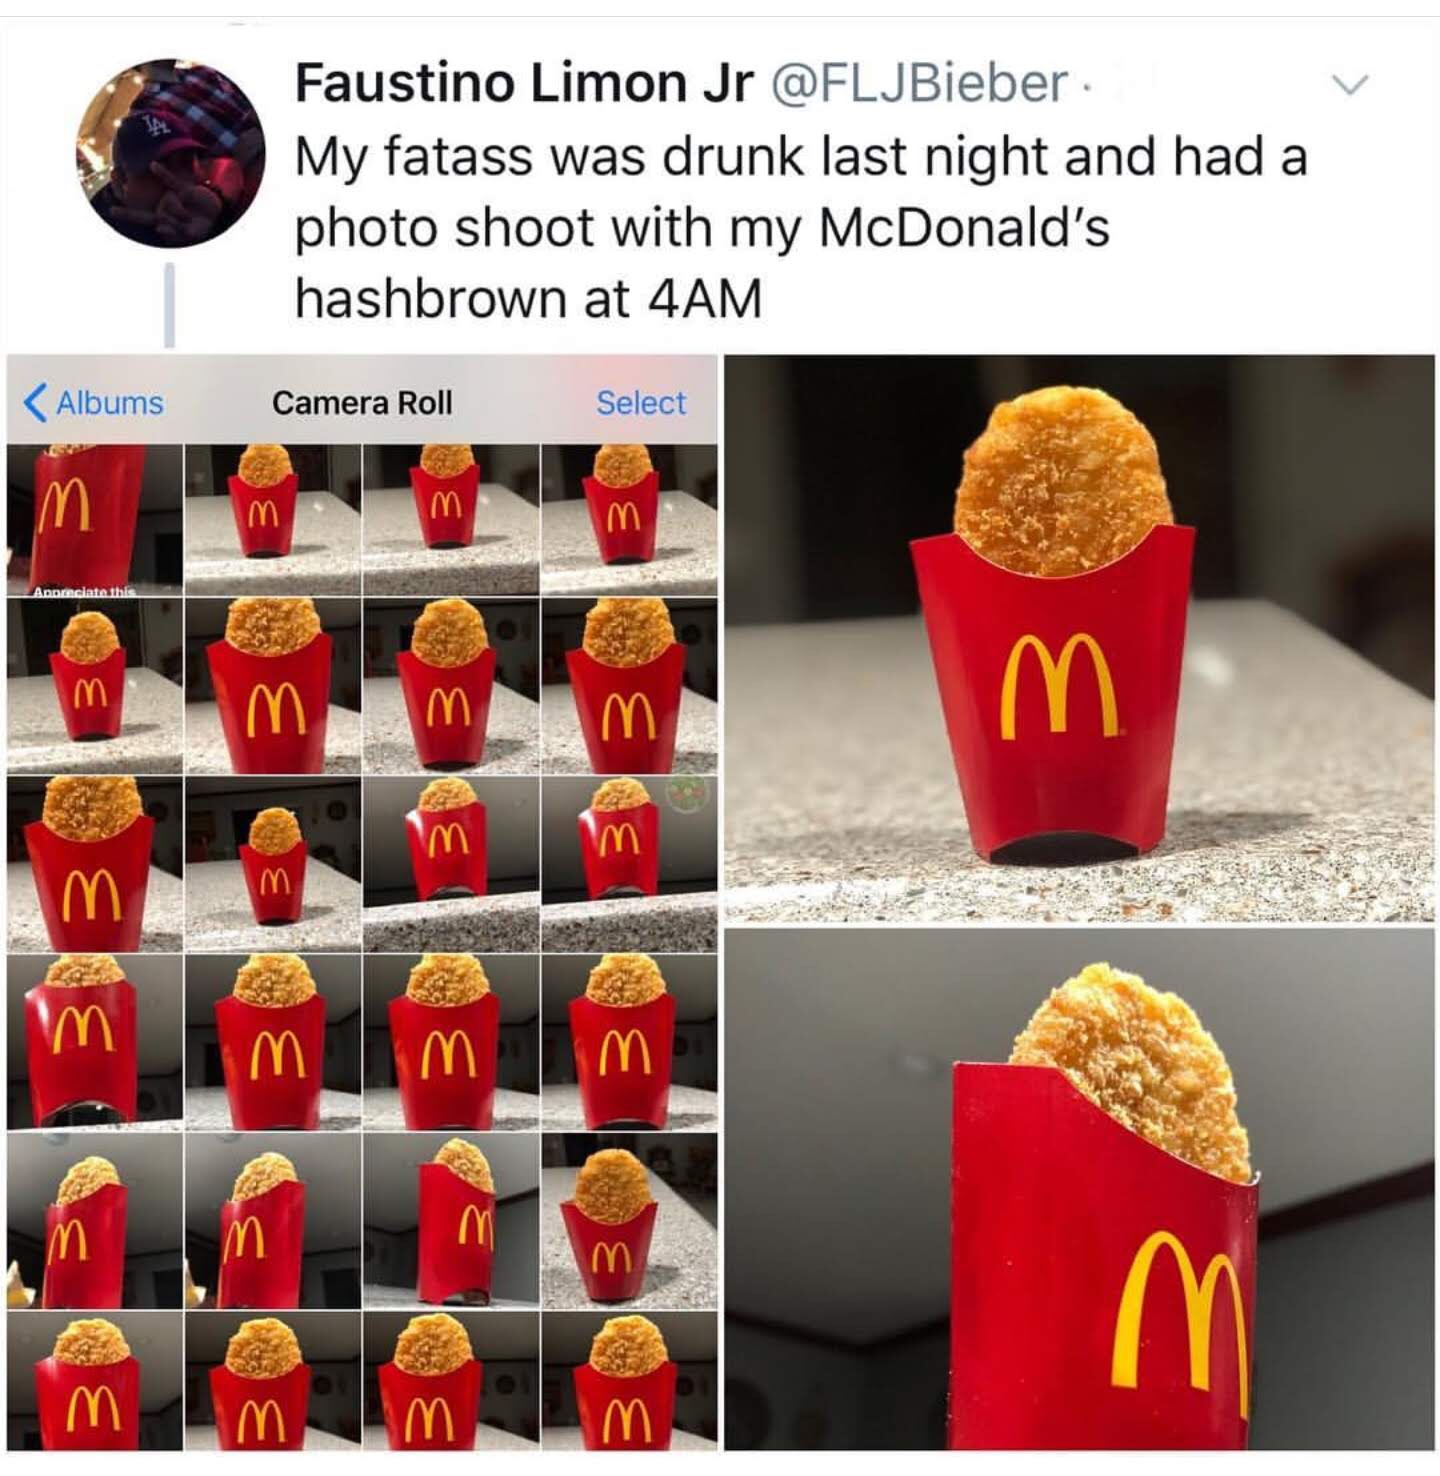 memes - photoshoot with hash brown - Faustino Limon Jr My fatass was drunk last night and had a photo shoot with my McDonald's hashbrown at 4AM Albums Camera Roll Select m Appreciate thi m.